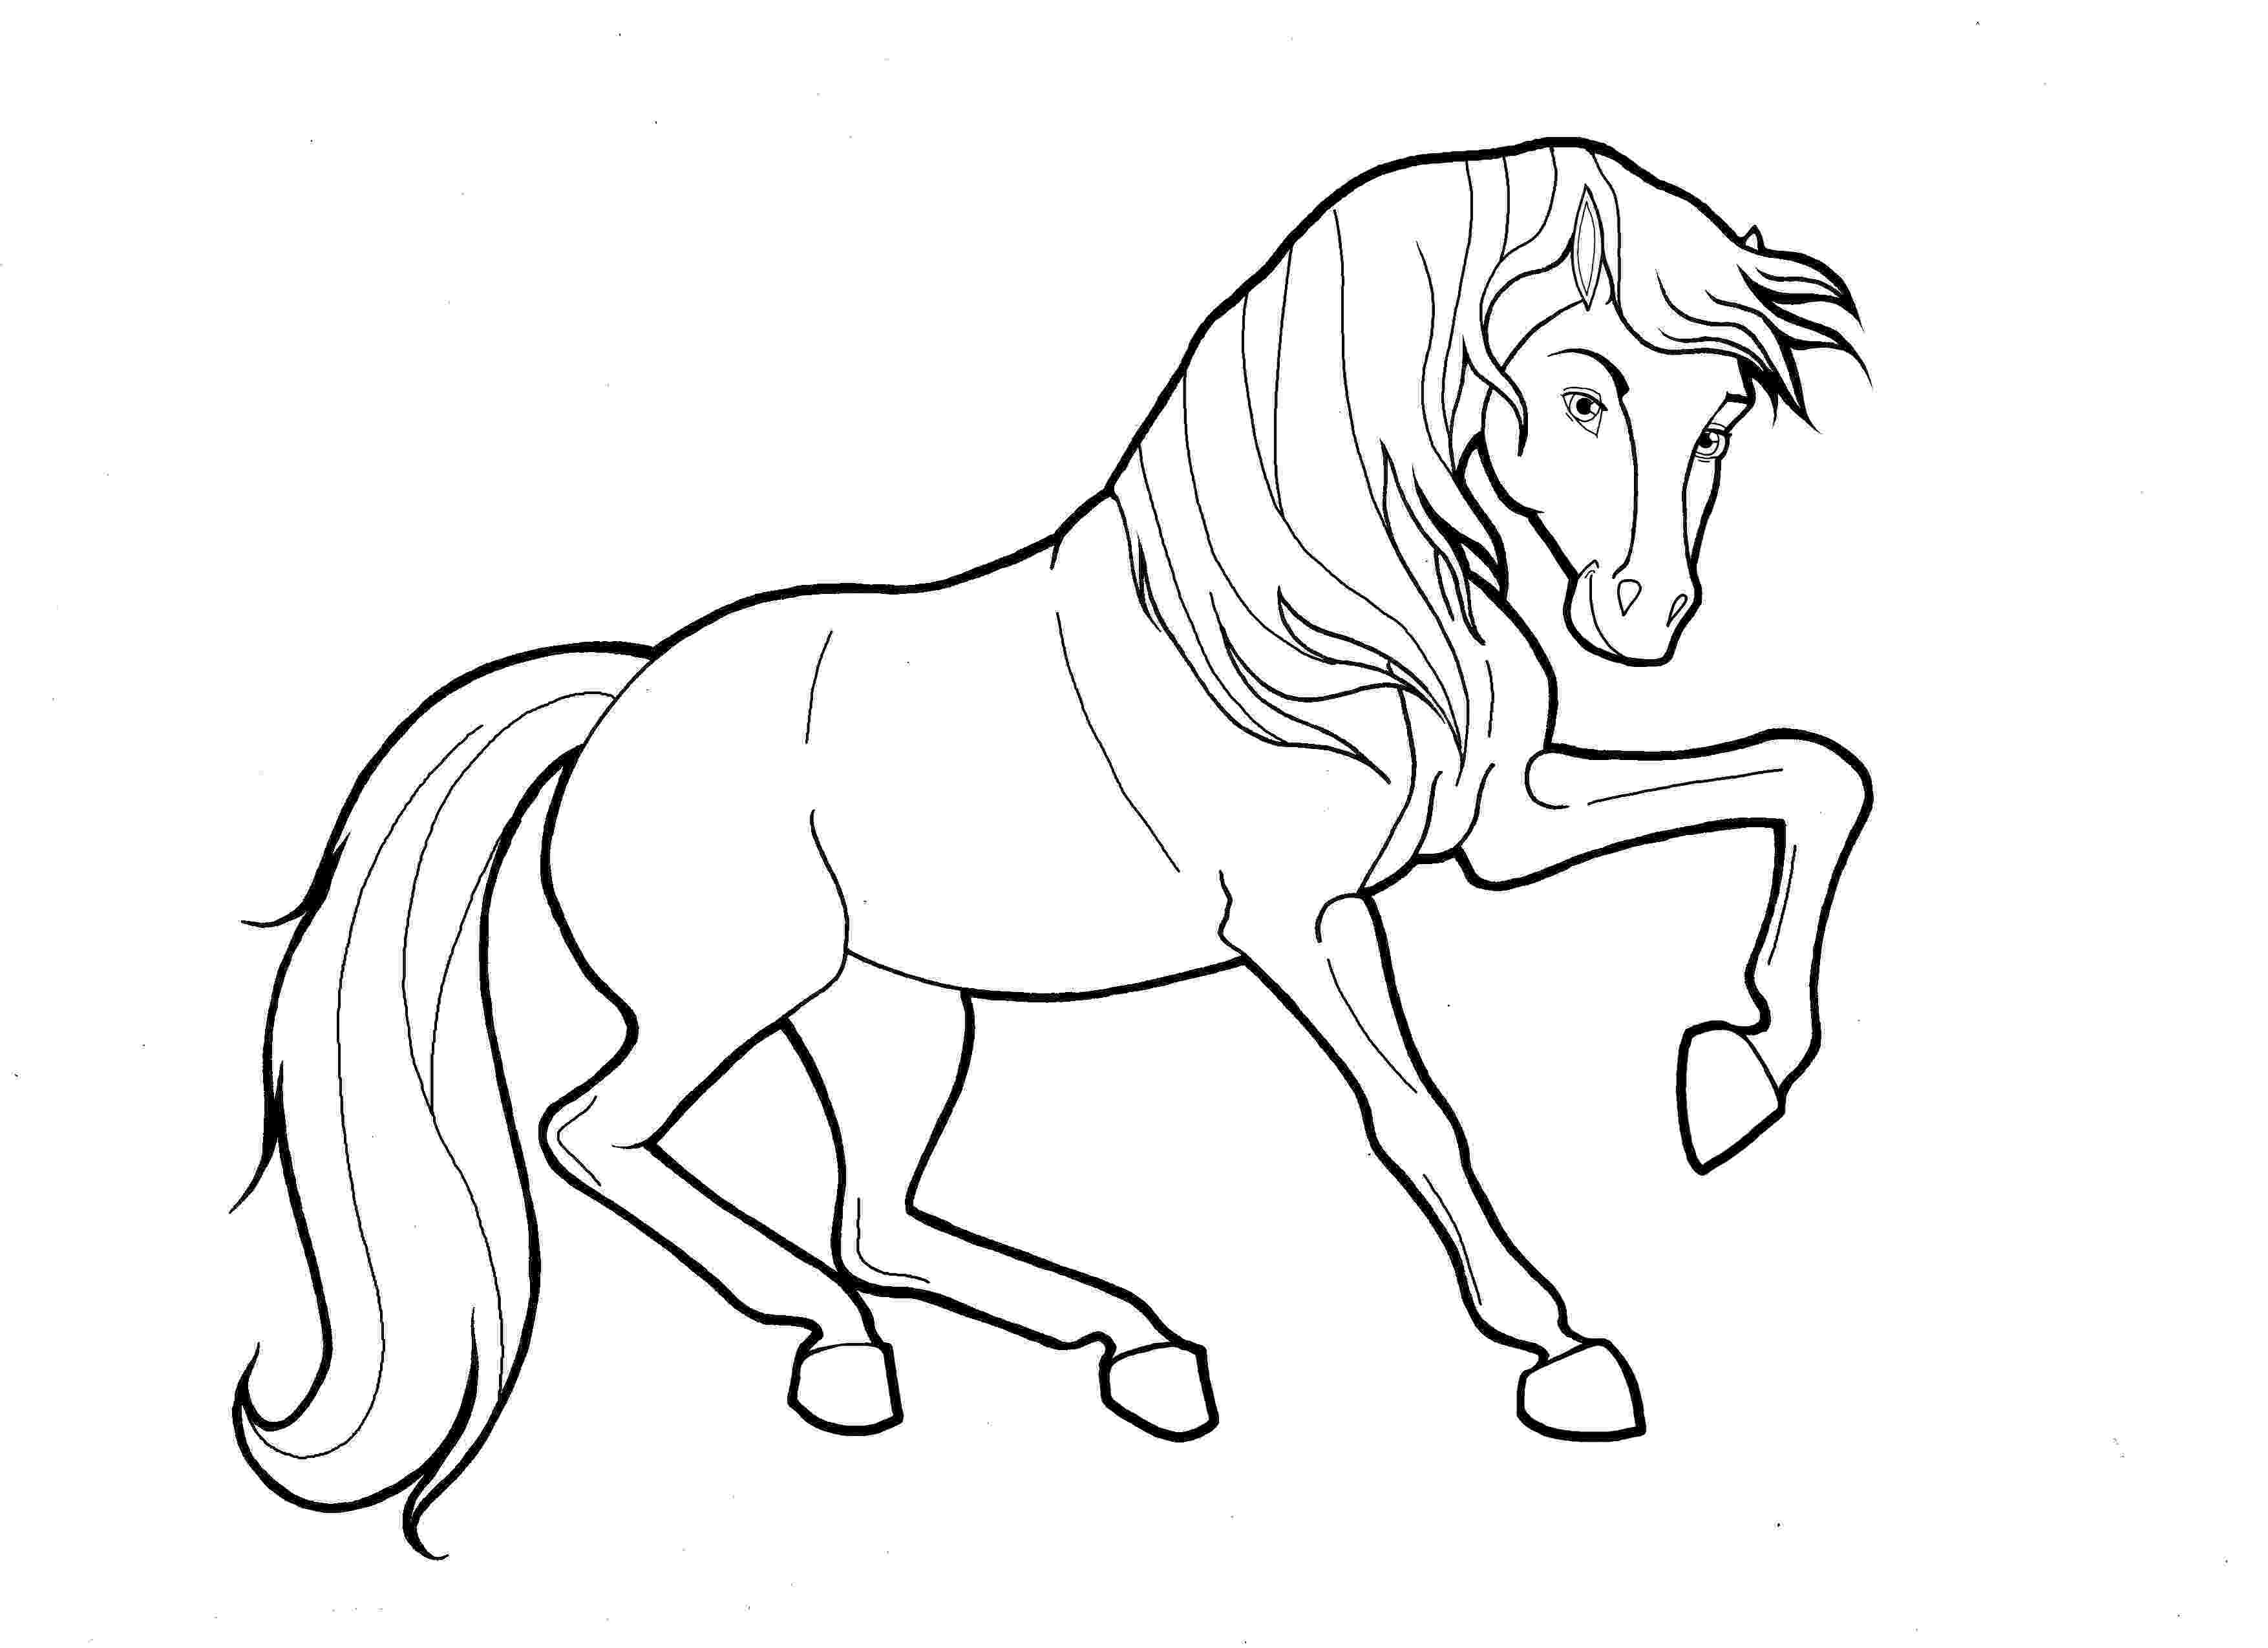 coloring pages horses coloring pages of horses printable free coloring sheets coloring pages horses 